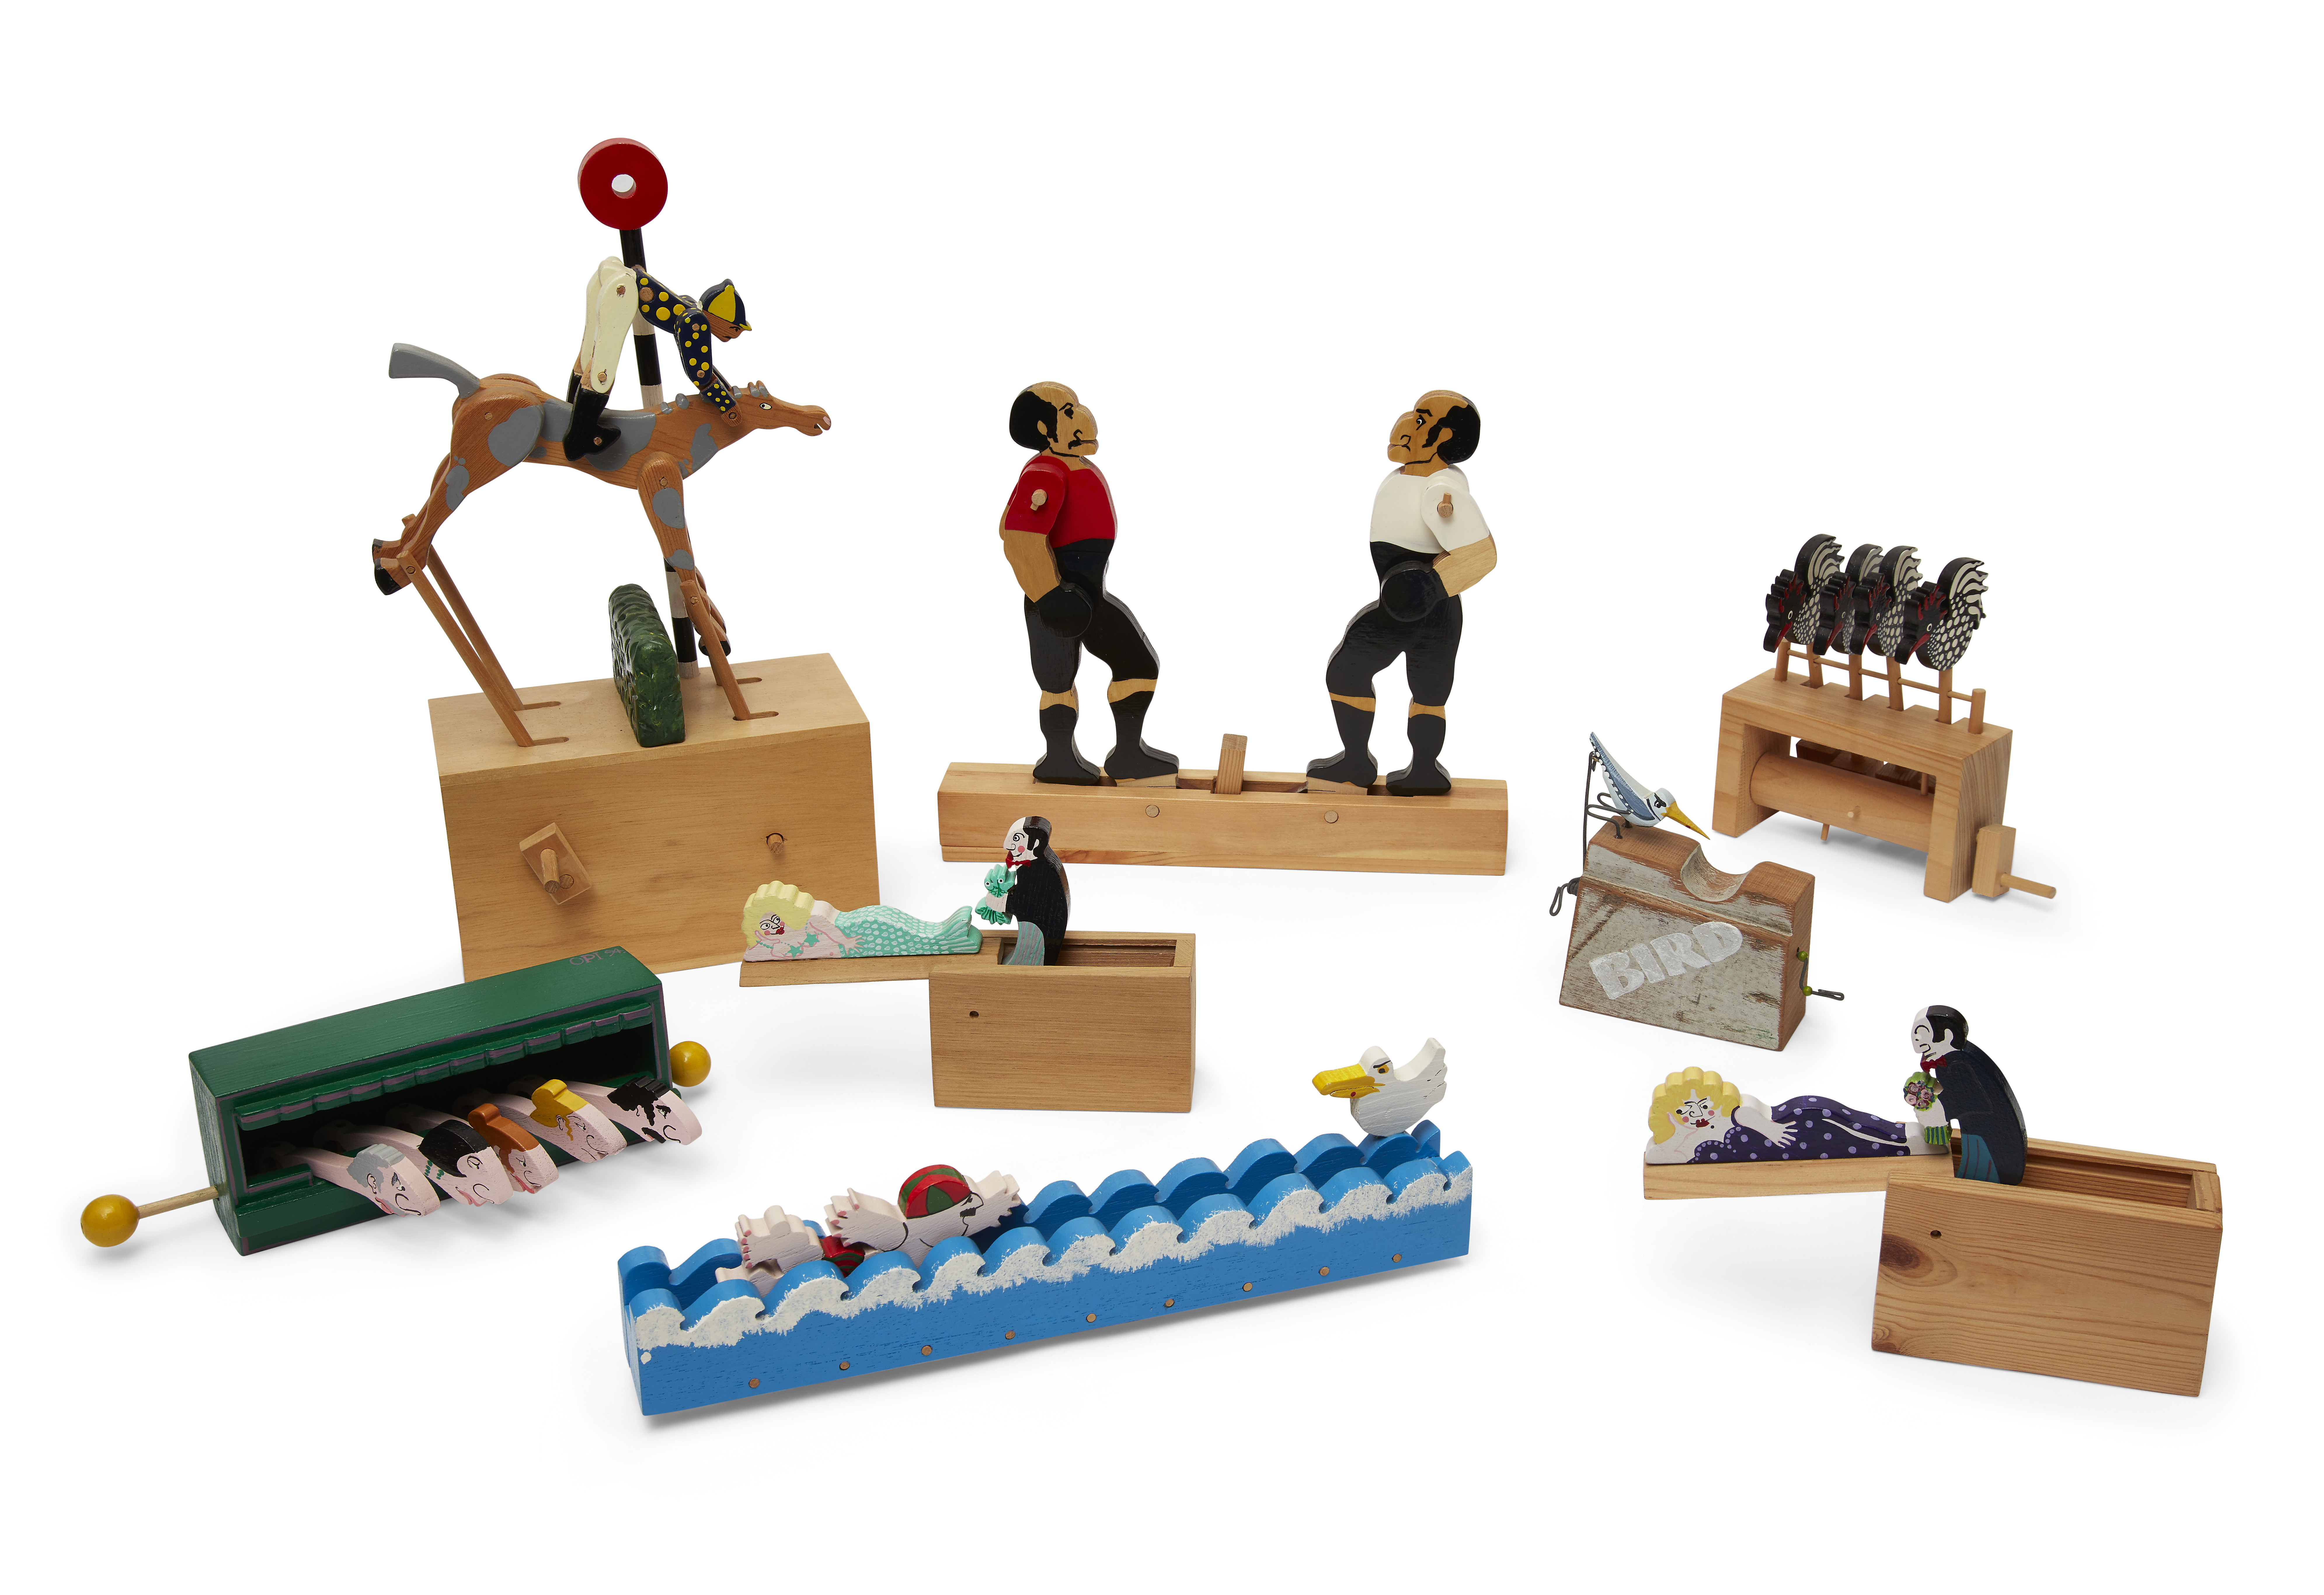 A collection of hand-operated automata